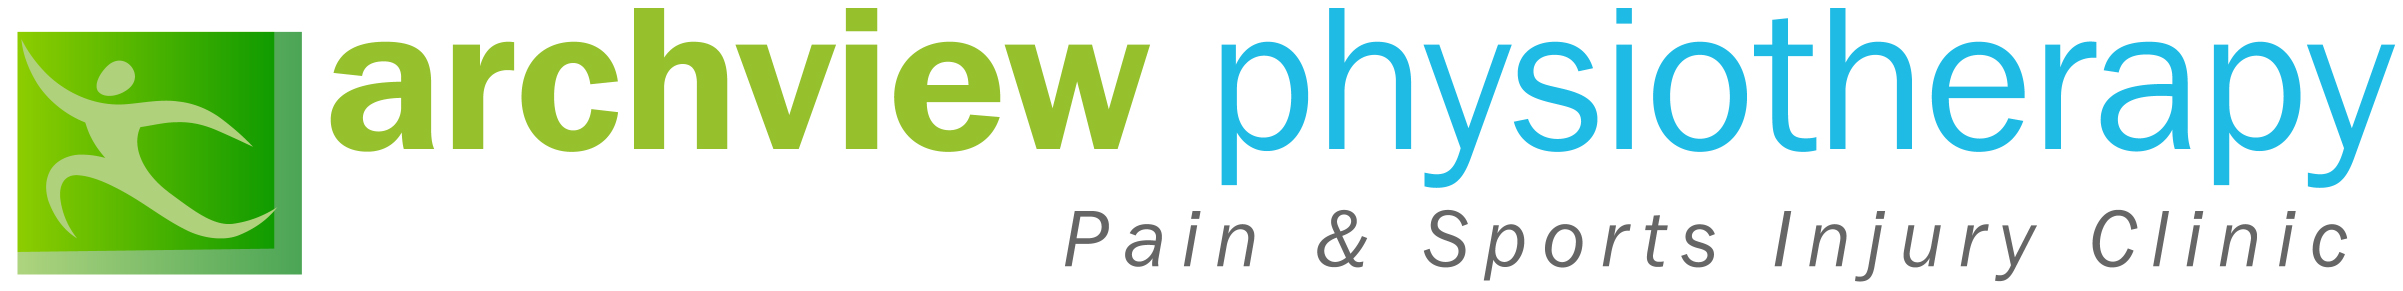 Archview Physiotherapy | Massage | Dry Needling | Pilates